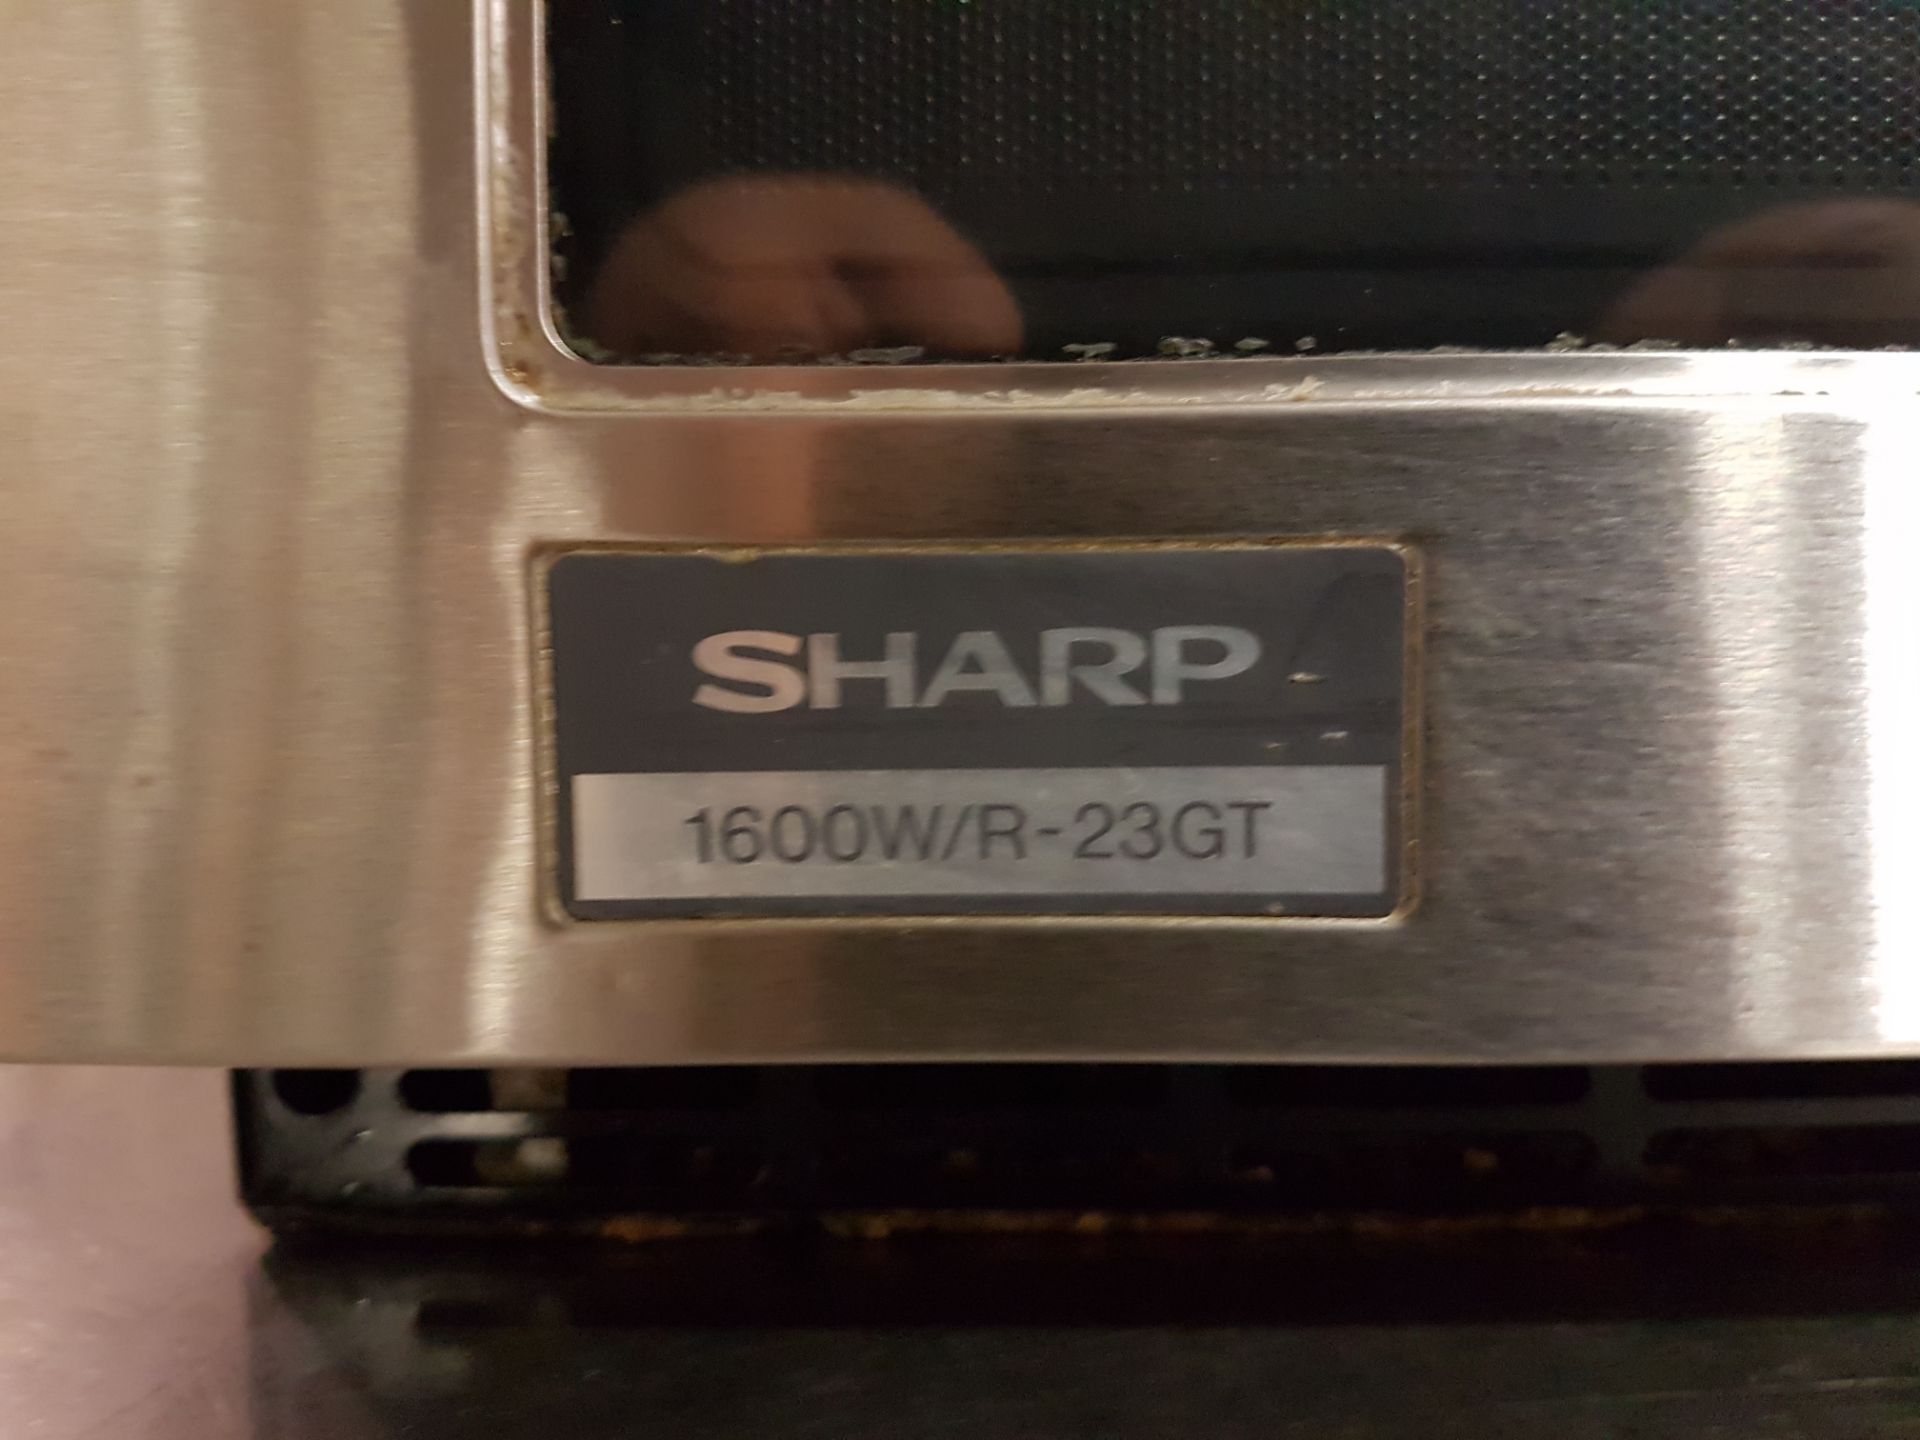 Sharp Commercial Microwave - Model R-23GT-F - Image 2 of 3